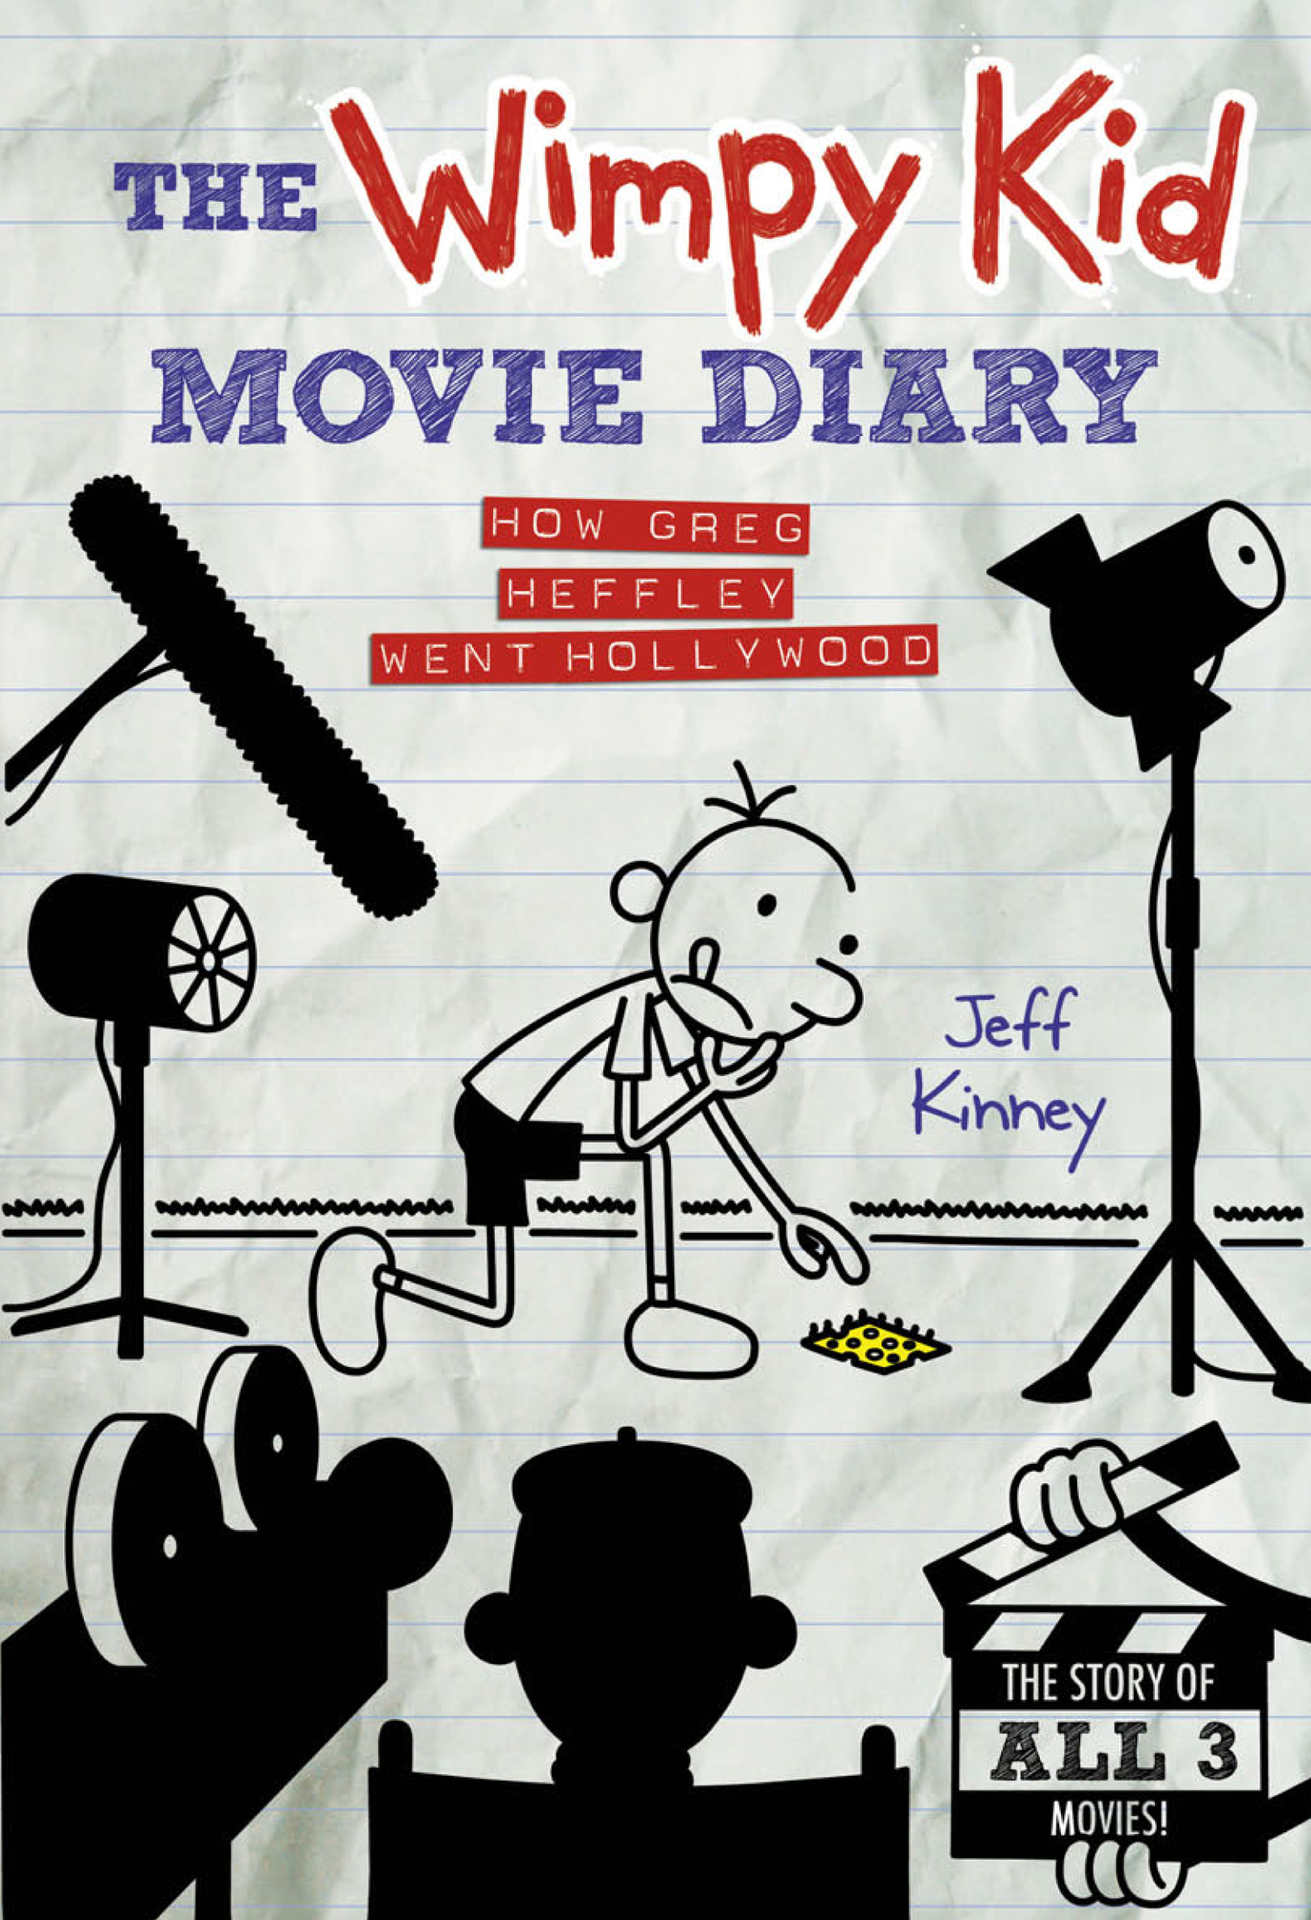 The Wimpy Kid Movie Diary (Dog Days revised and expanded edition) (Diary of a Wimpy Kid)